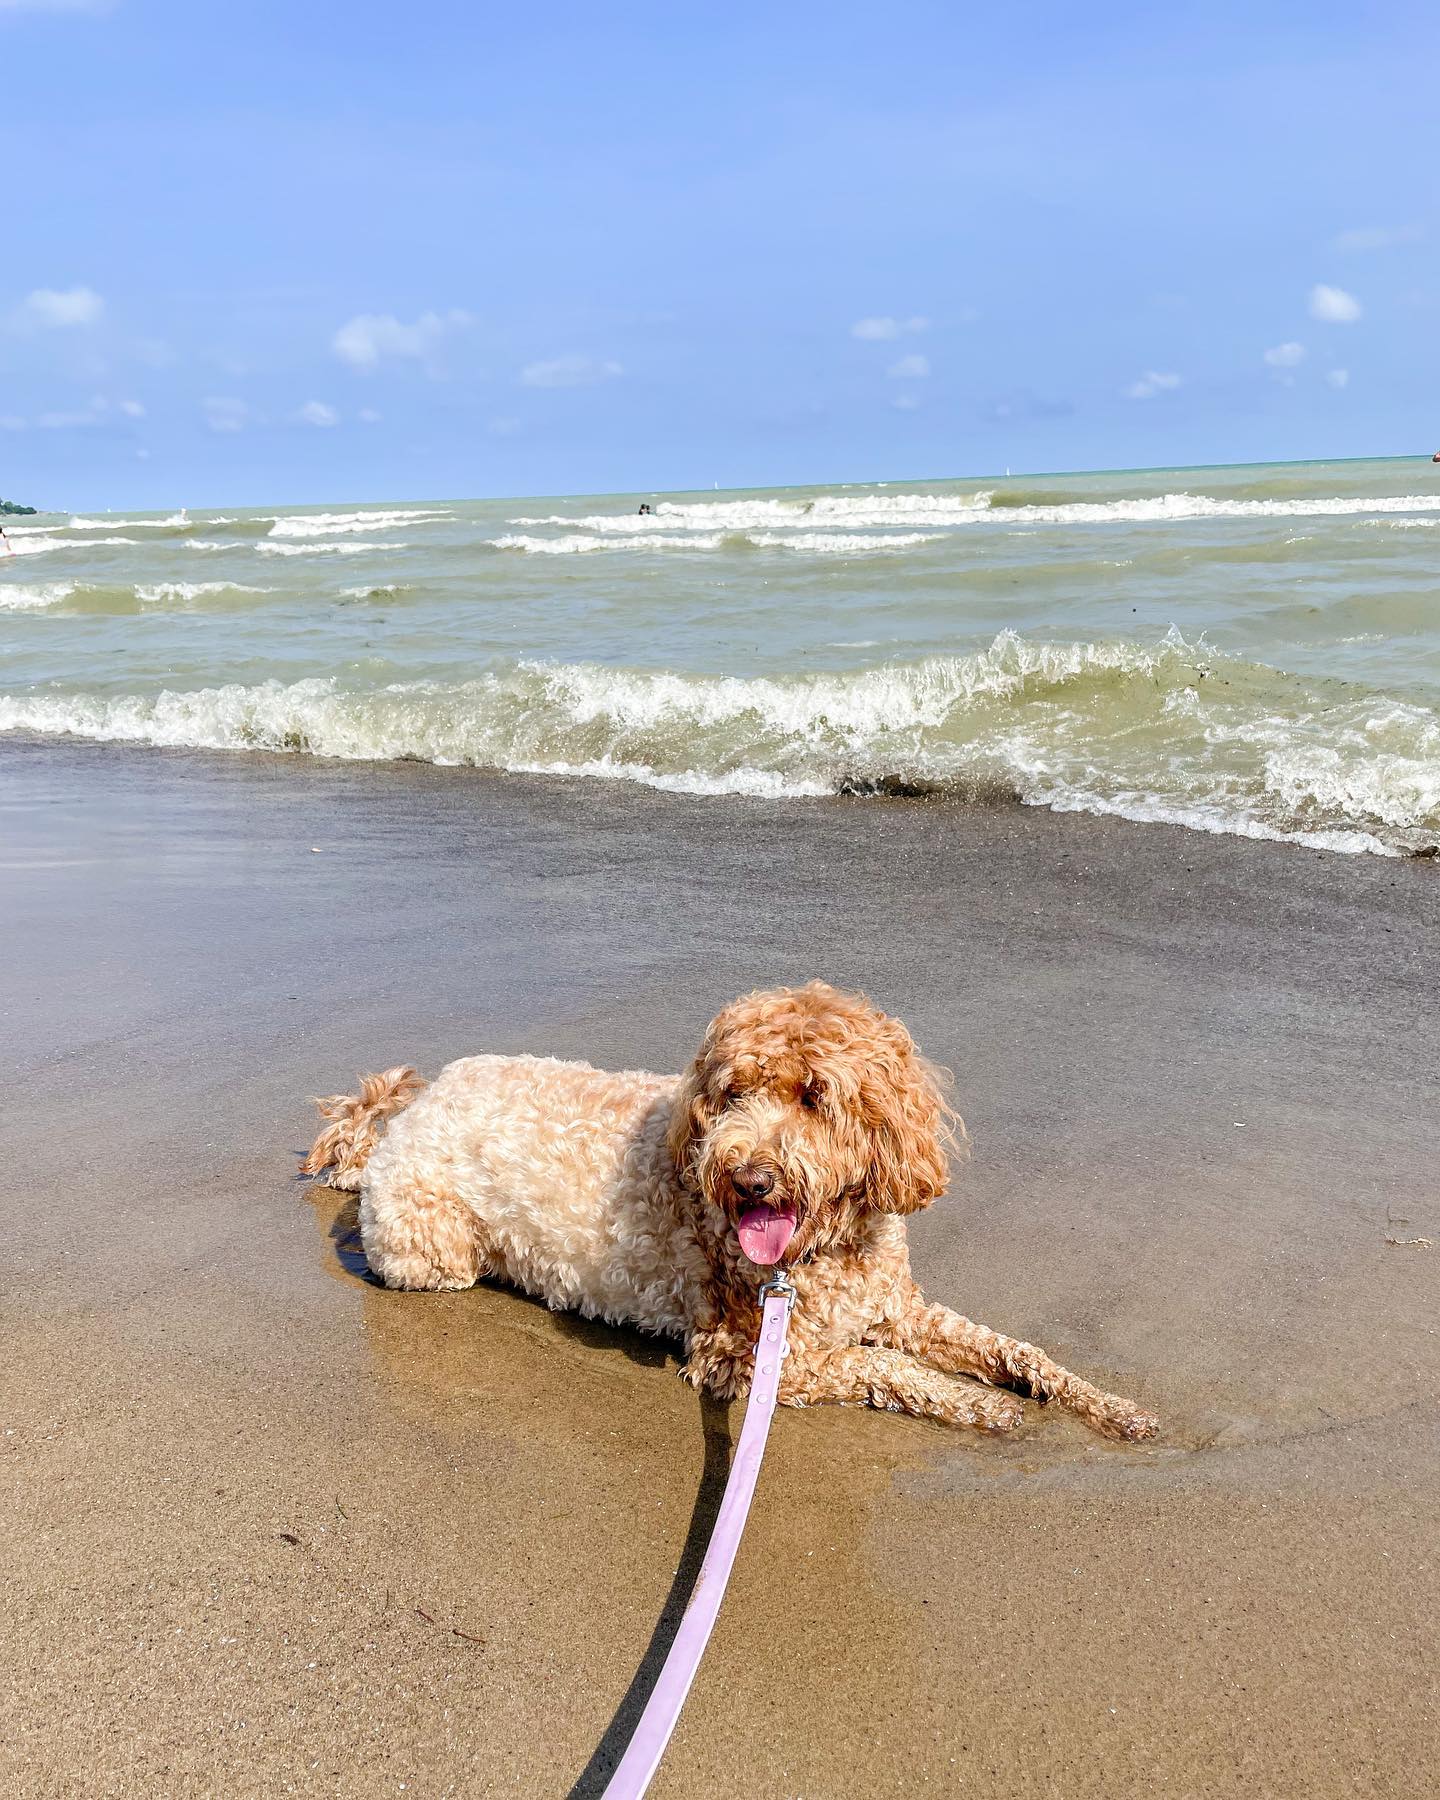 Beach day!! ⛱
A little too wavy for swimming, but happy with our annual romp on a sand beach. 
.
.
.
.
.
#goldendoodle #goldendoodlesofinstagram #doodlesofinstagram #doodlelove #doodsofcanada #dogsoftoronto #dogsofinsta #dogsonadventures #waterdogsofinstagram #minigoldendoodlepuppy #minigoldendoodle